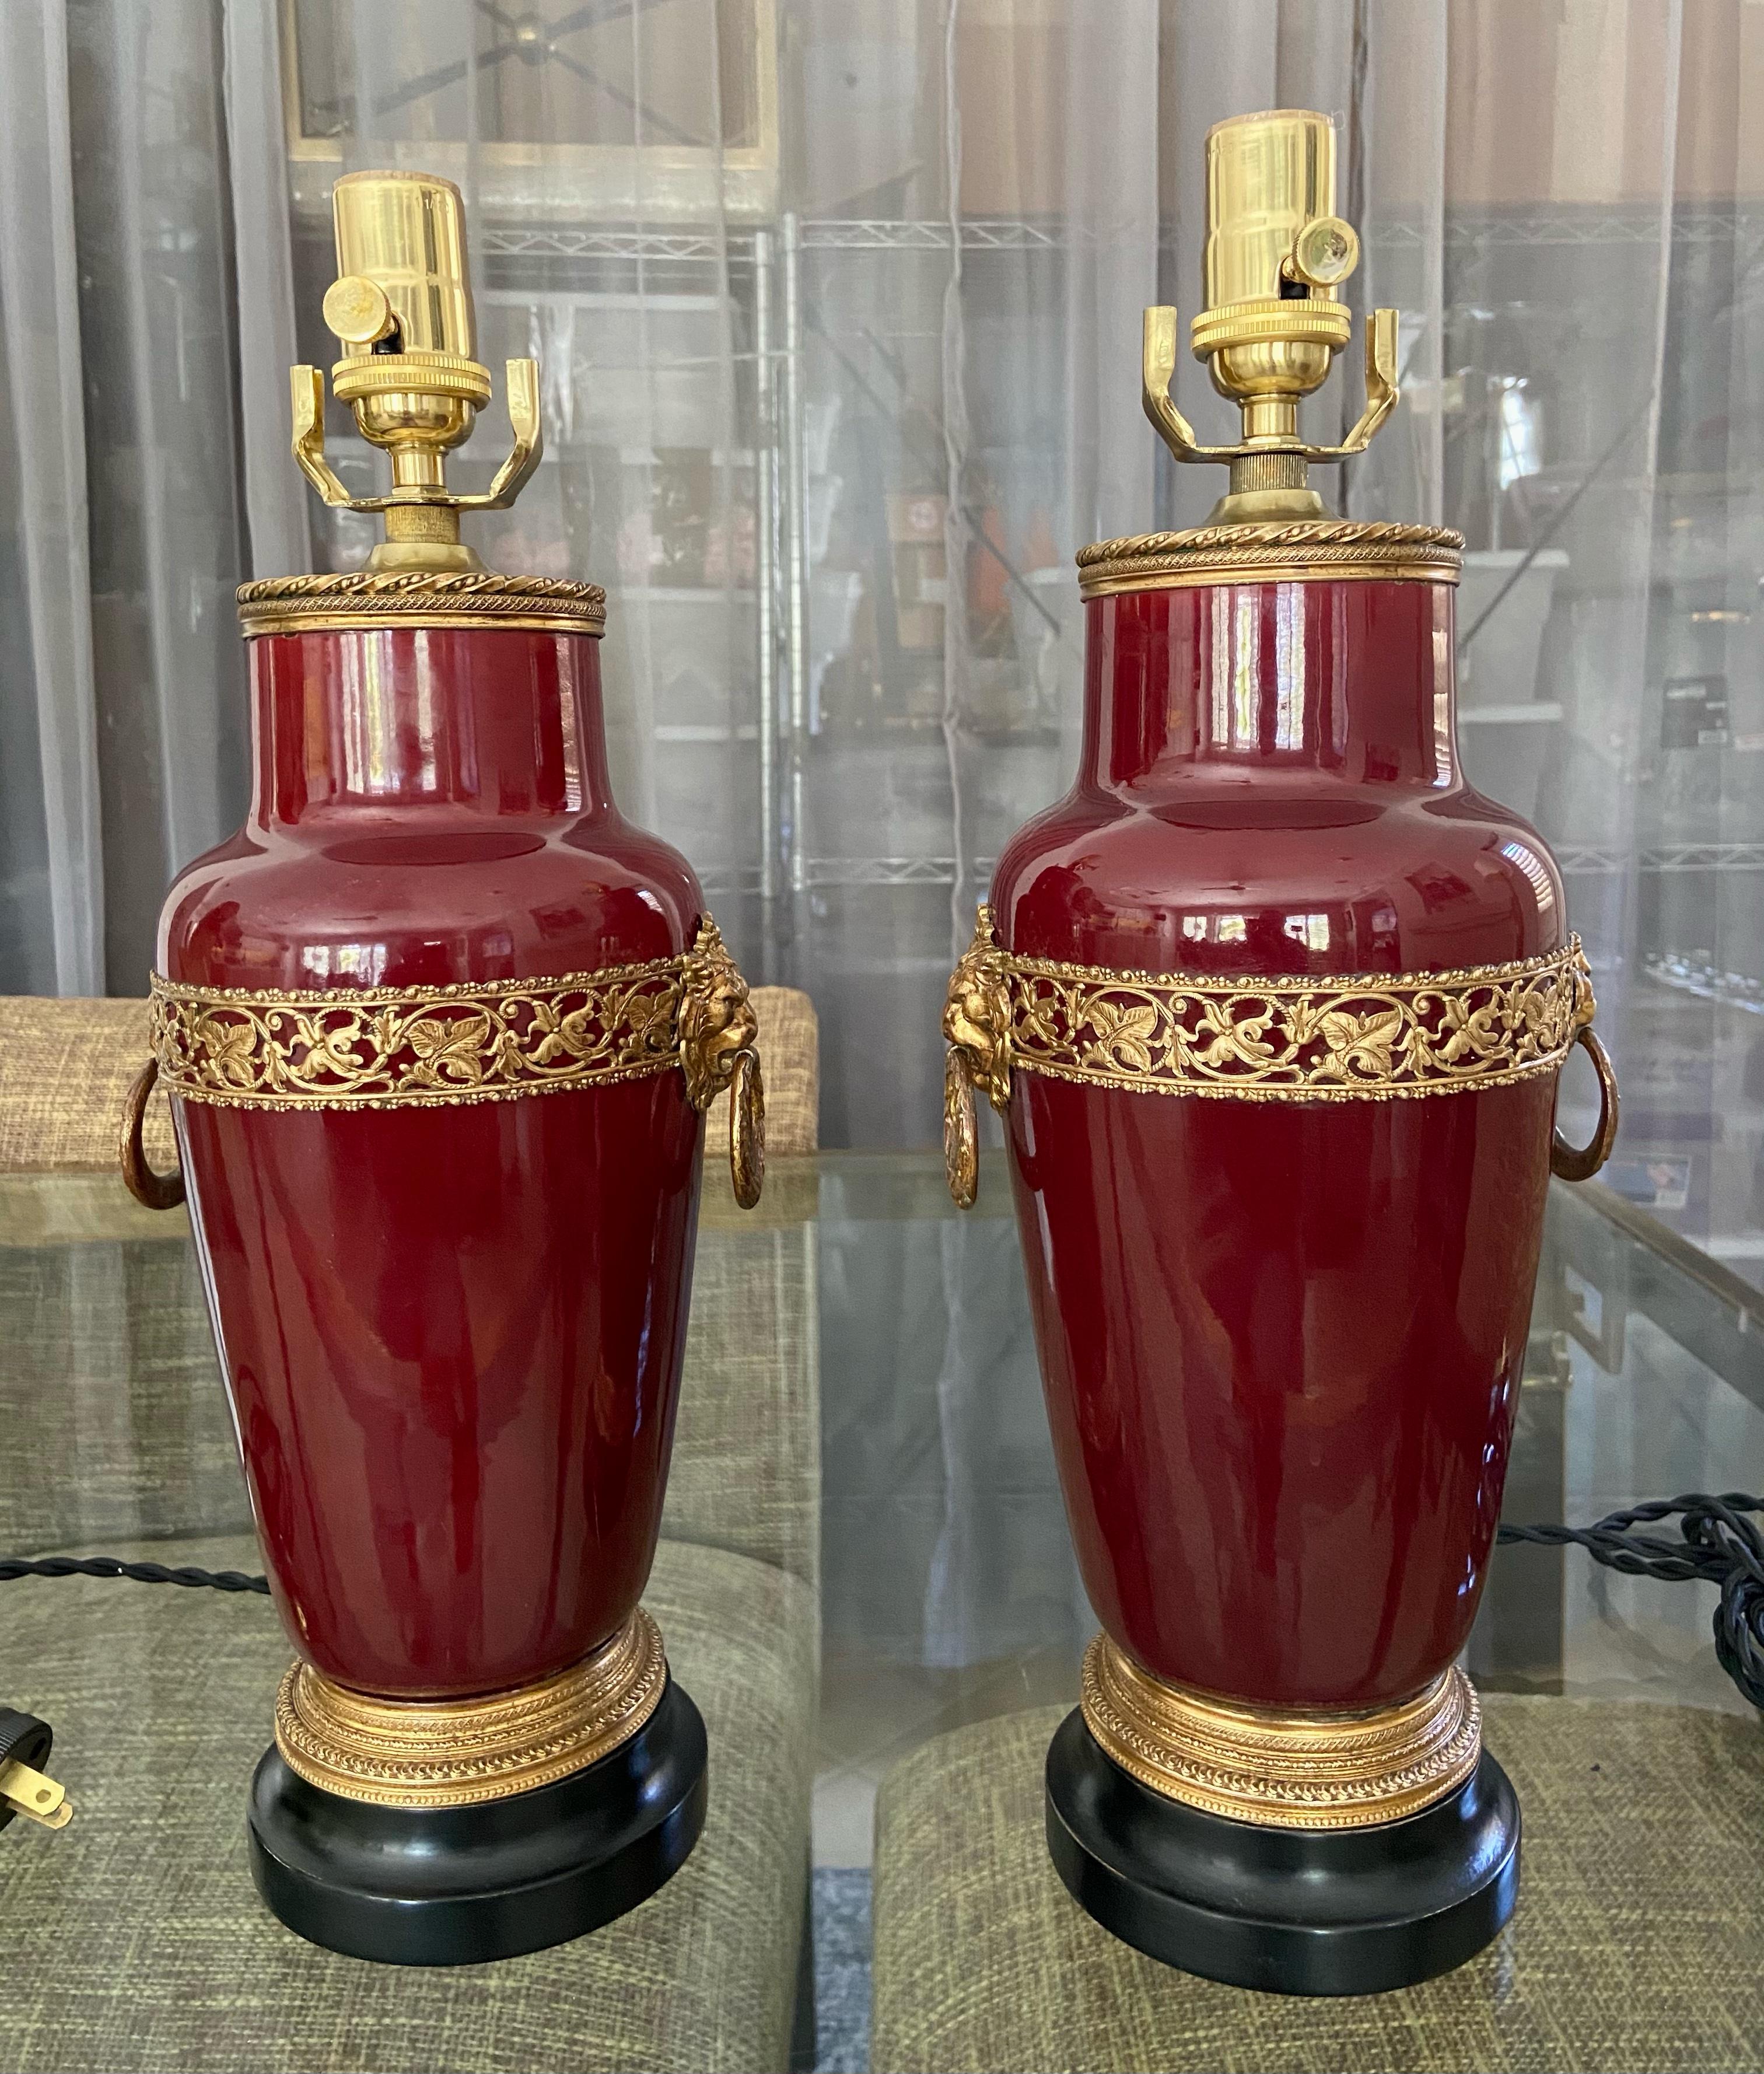 Pair of smaller scale early 20th century French Sang De Boeuf Oxblood vases converted as table lamps by Sarreguemines, France. Vases are adorned with finely detailed ormolu gilt bronze fittings including Lion heads with rings in their mouth. The